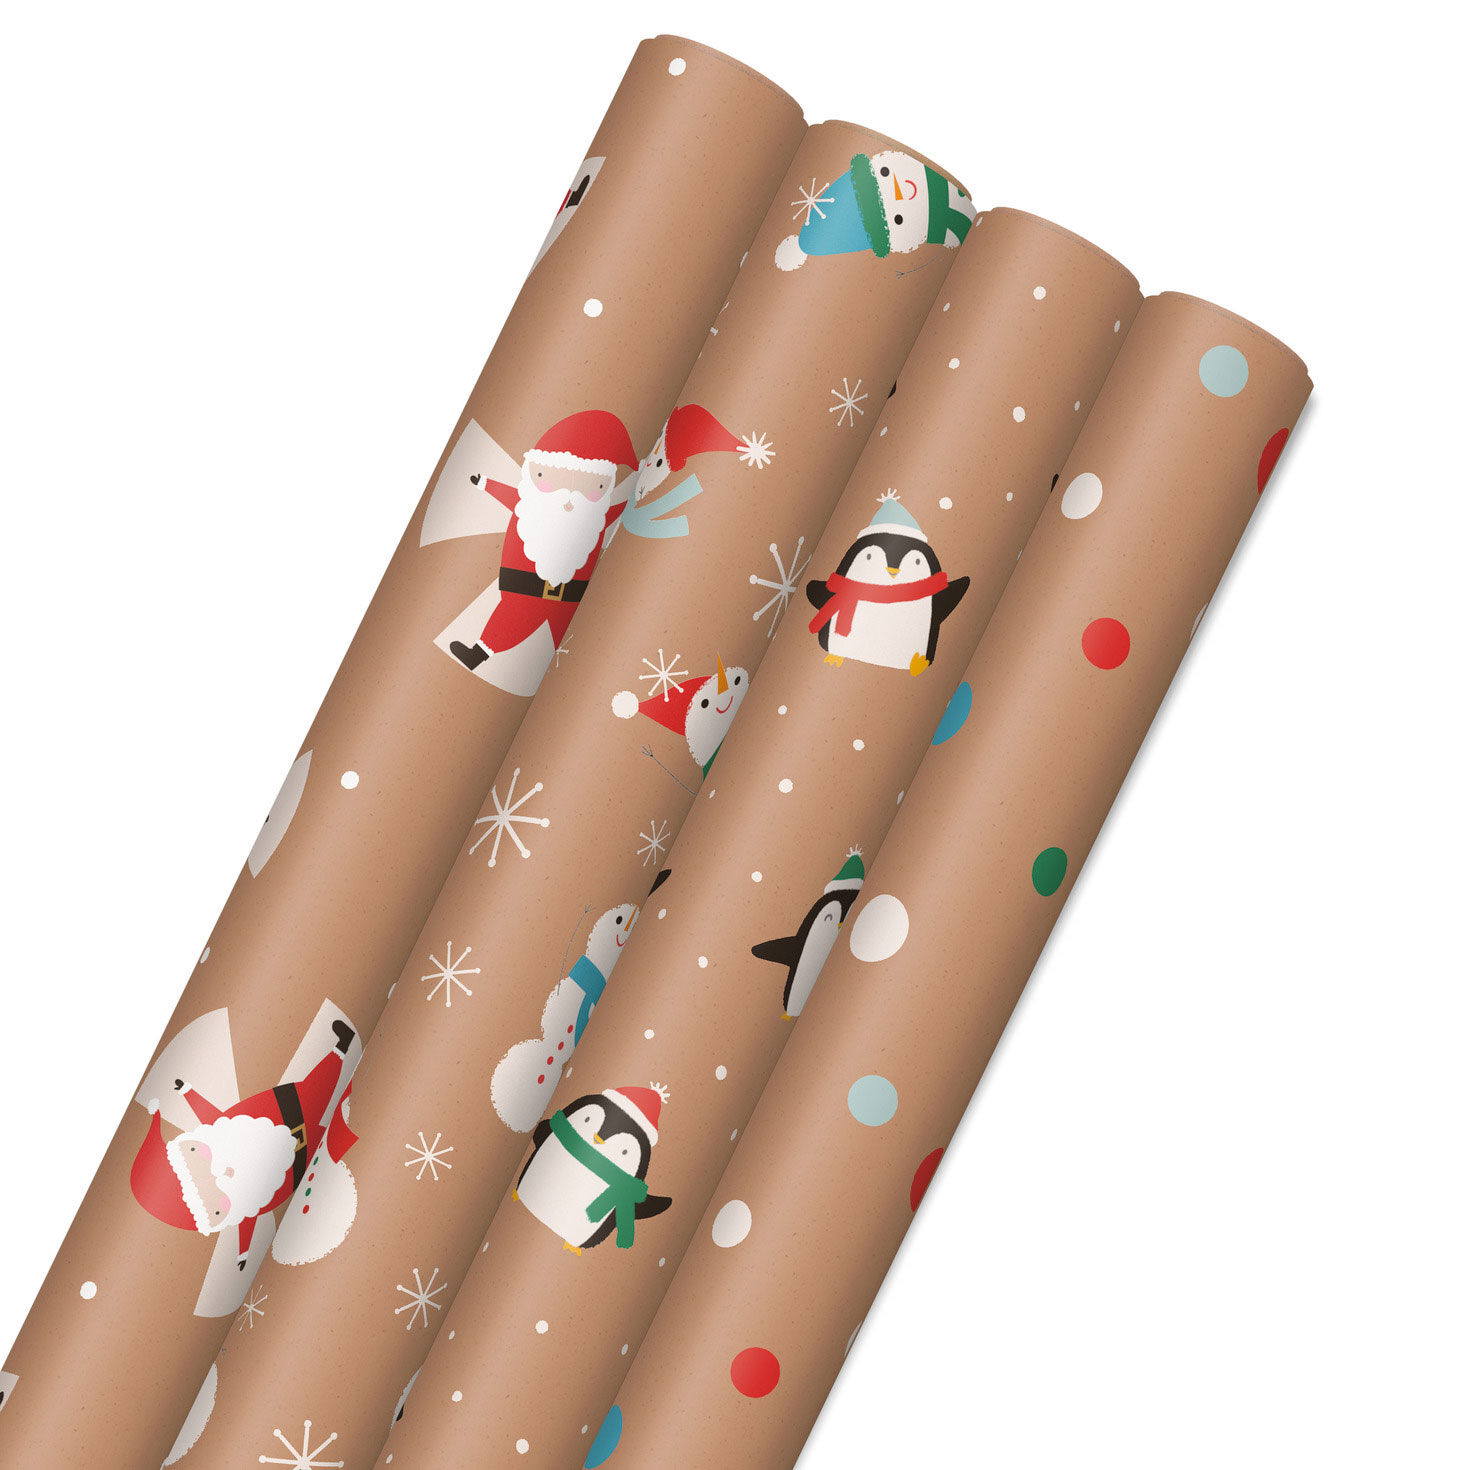 Hallmark Recyclable Christmas Wrapping Paper for Kids - 4.0 ea